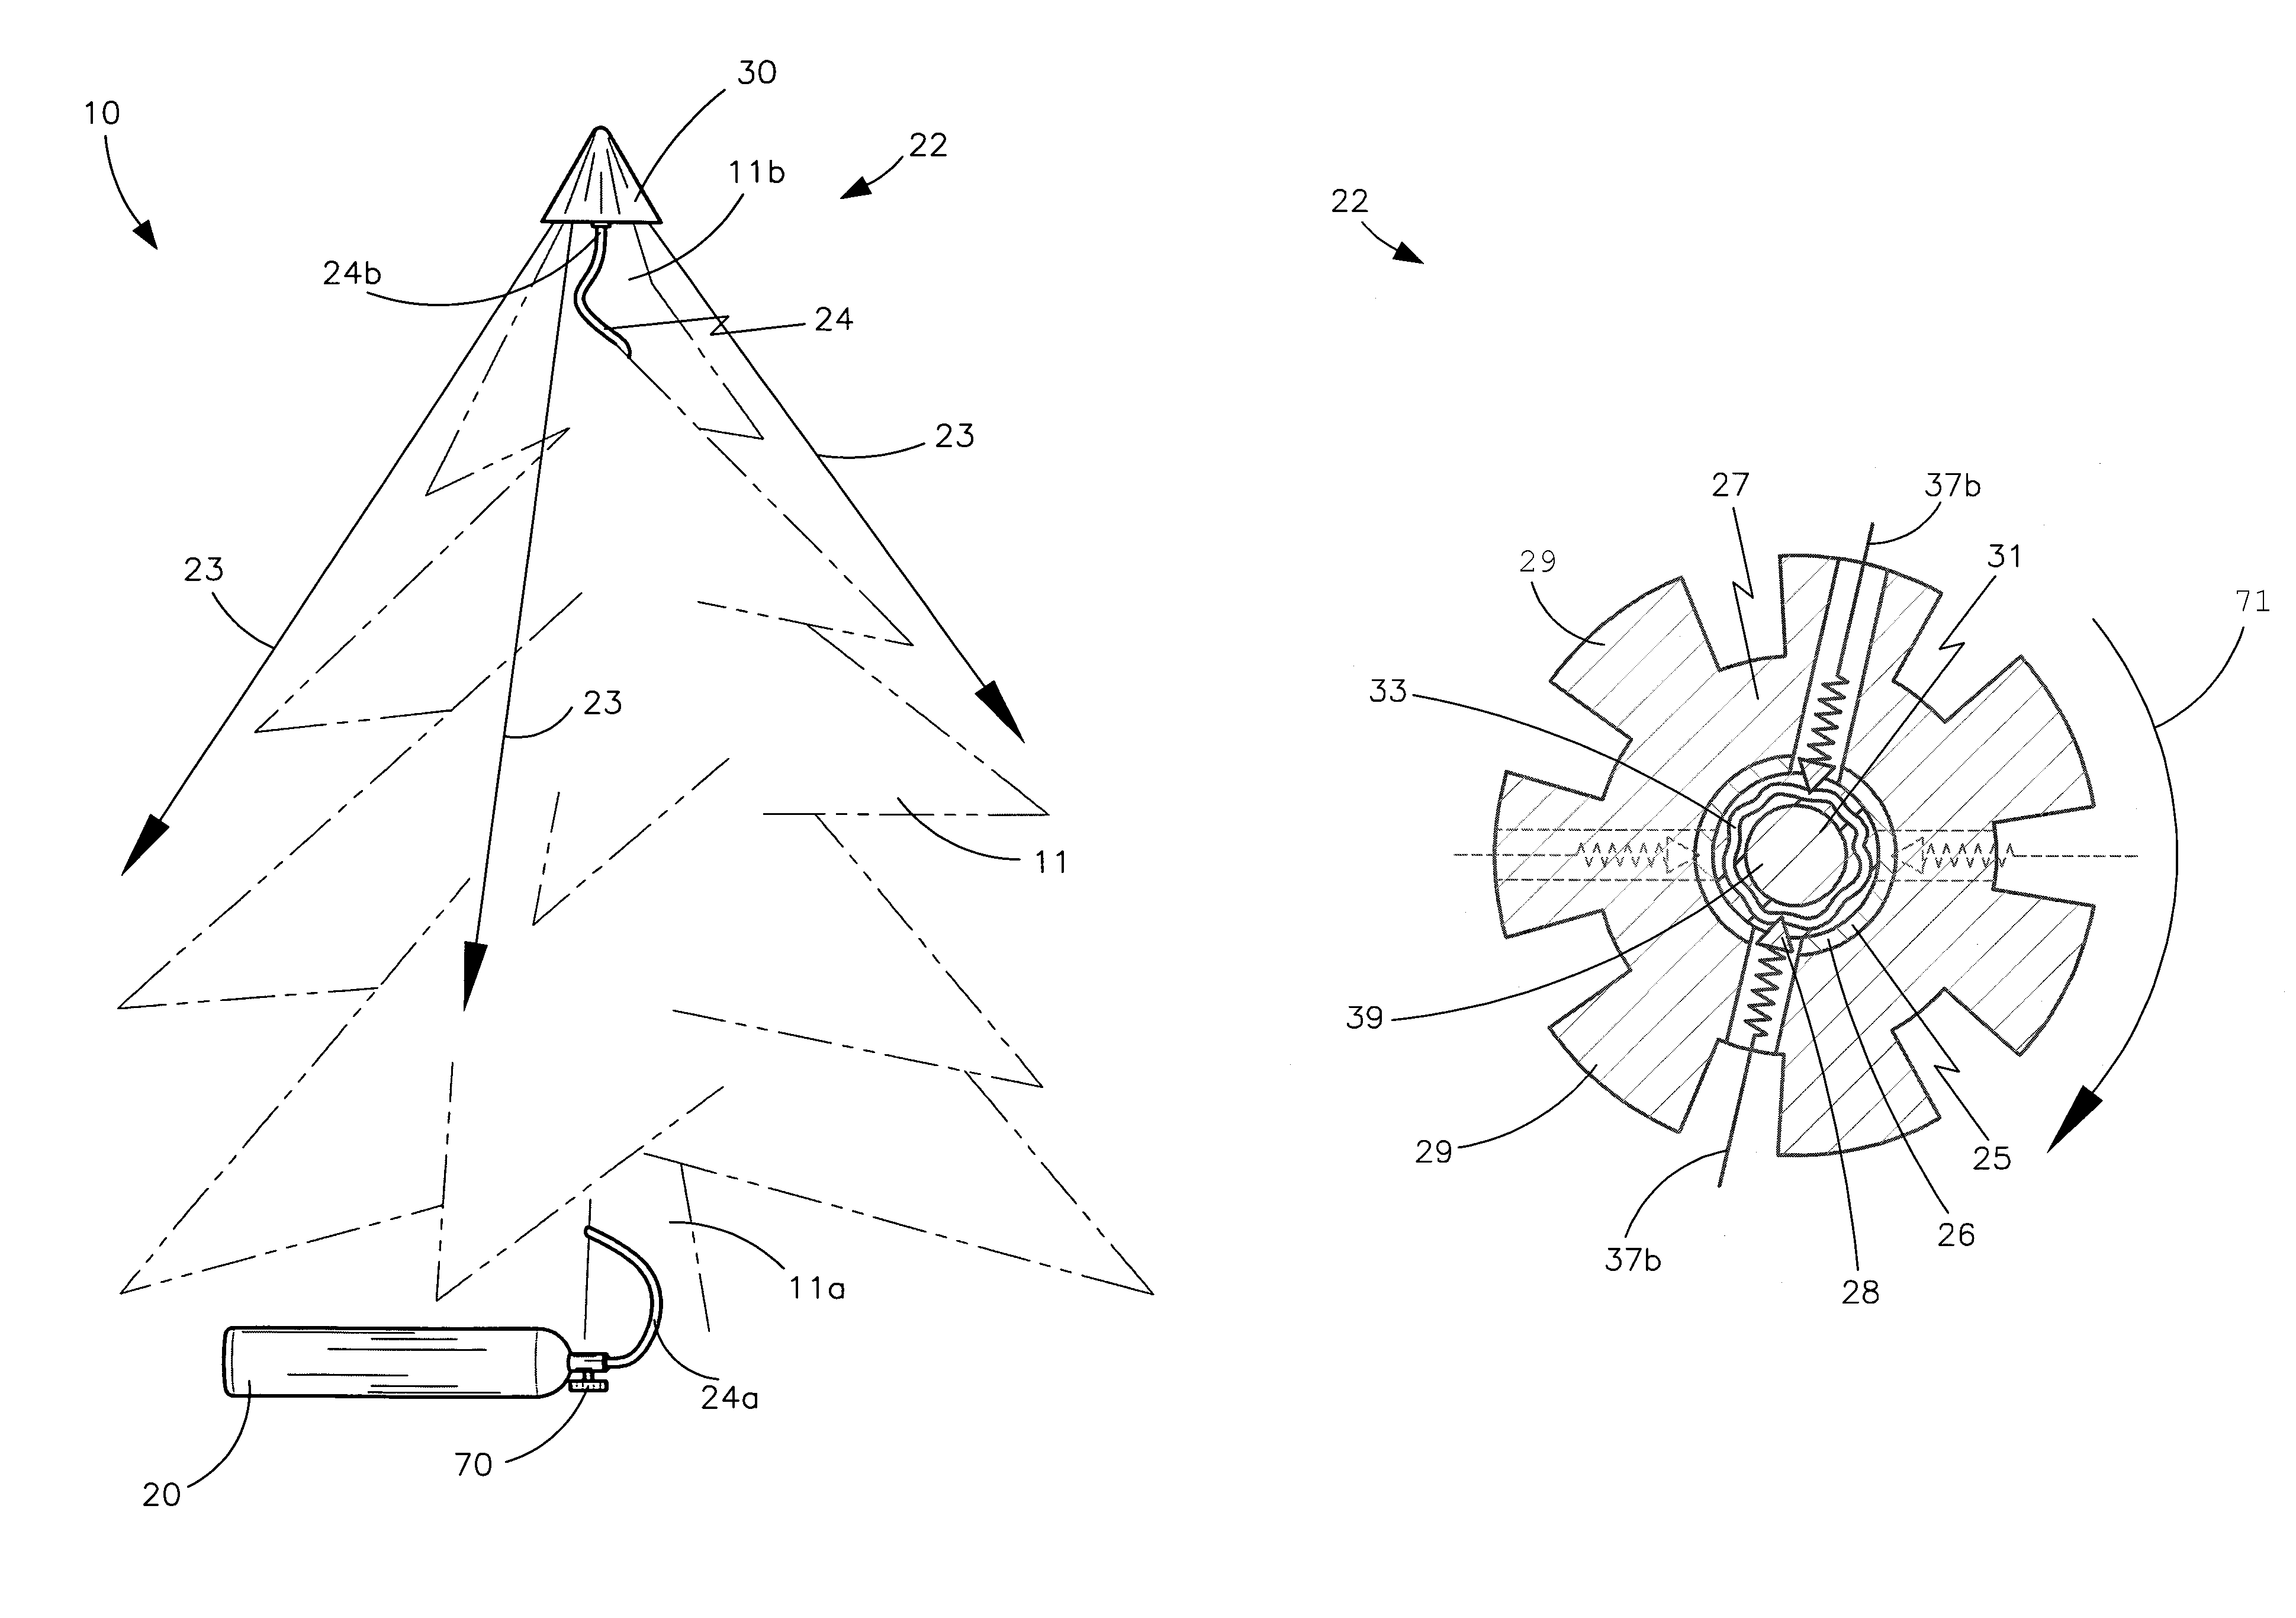 Automatic fire extinguishing system for an existing Christmas tree and associated method